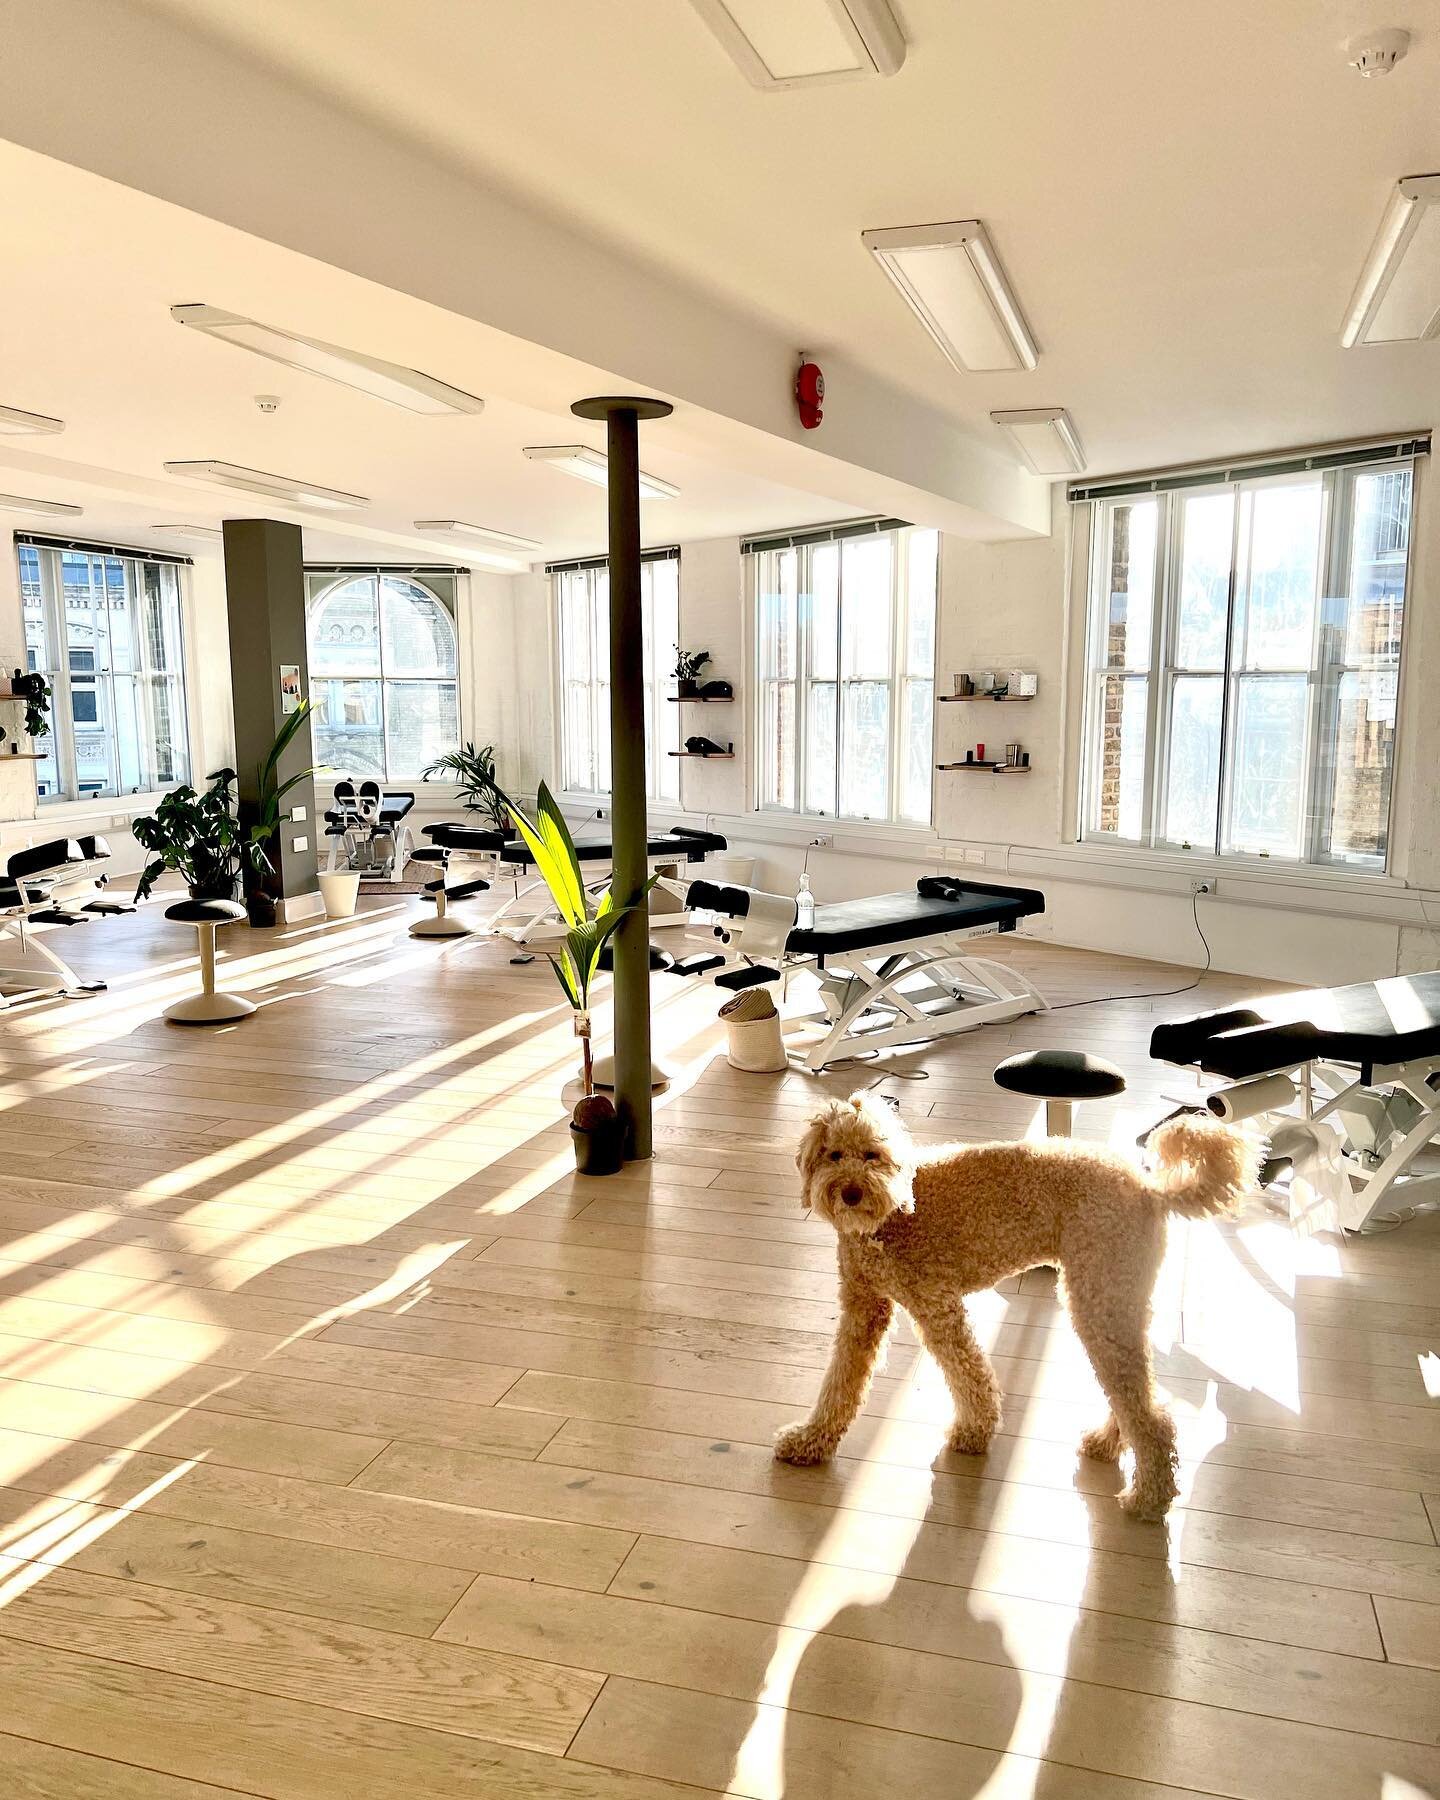 Its been 5 months since we moved to this new gorg open plan space in Shoreditch! 😍 We will never get over the sunlight shining through these windows!! ☀️ But there has been loads of other positive benefits we have noticed from our open plan healing 